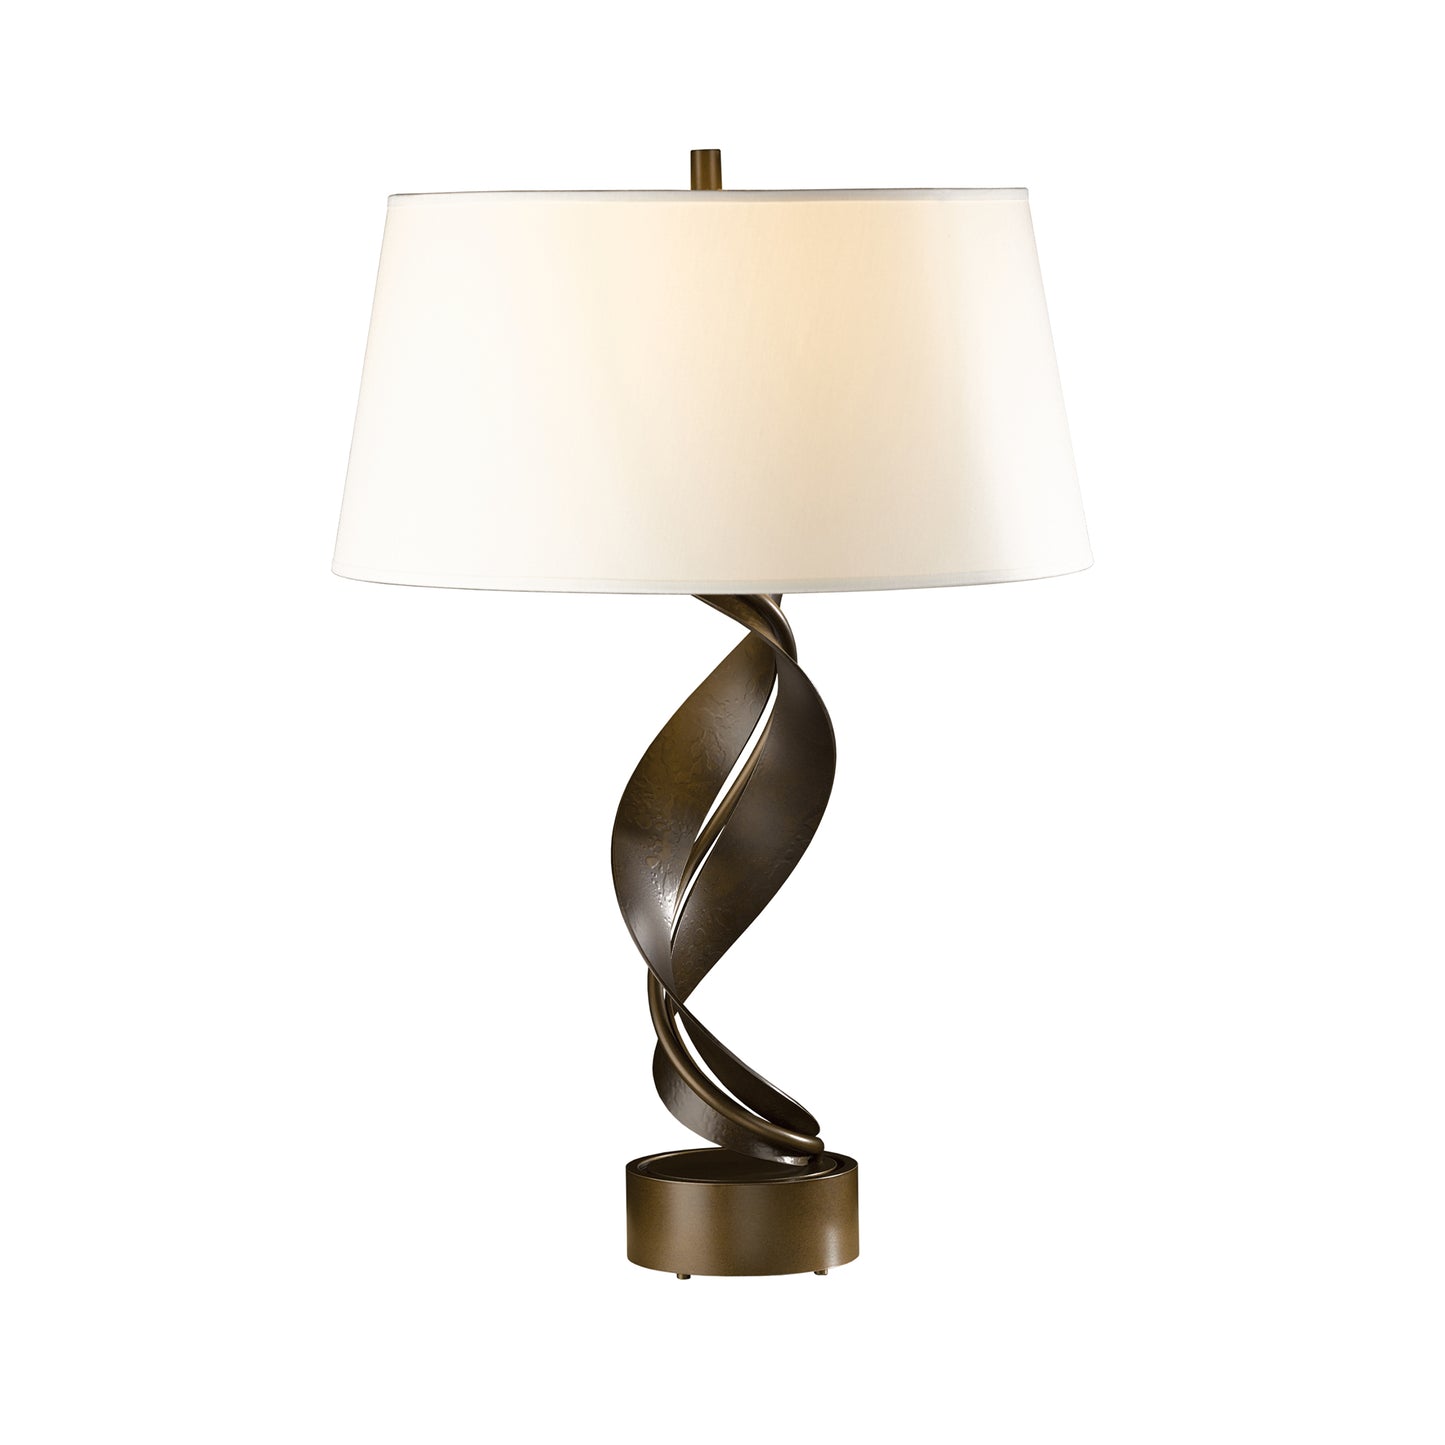 A hand-forged wrought iron Folio table lamp with a metal base and a white shade, made in Vermont by Hubbardton Forge.